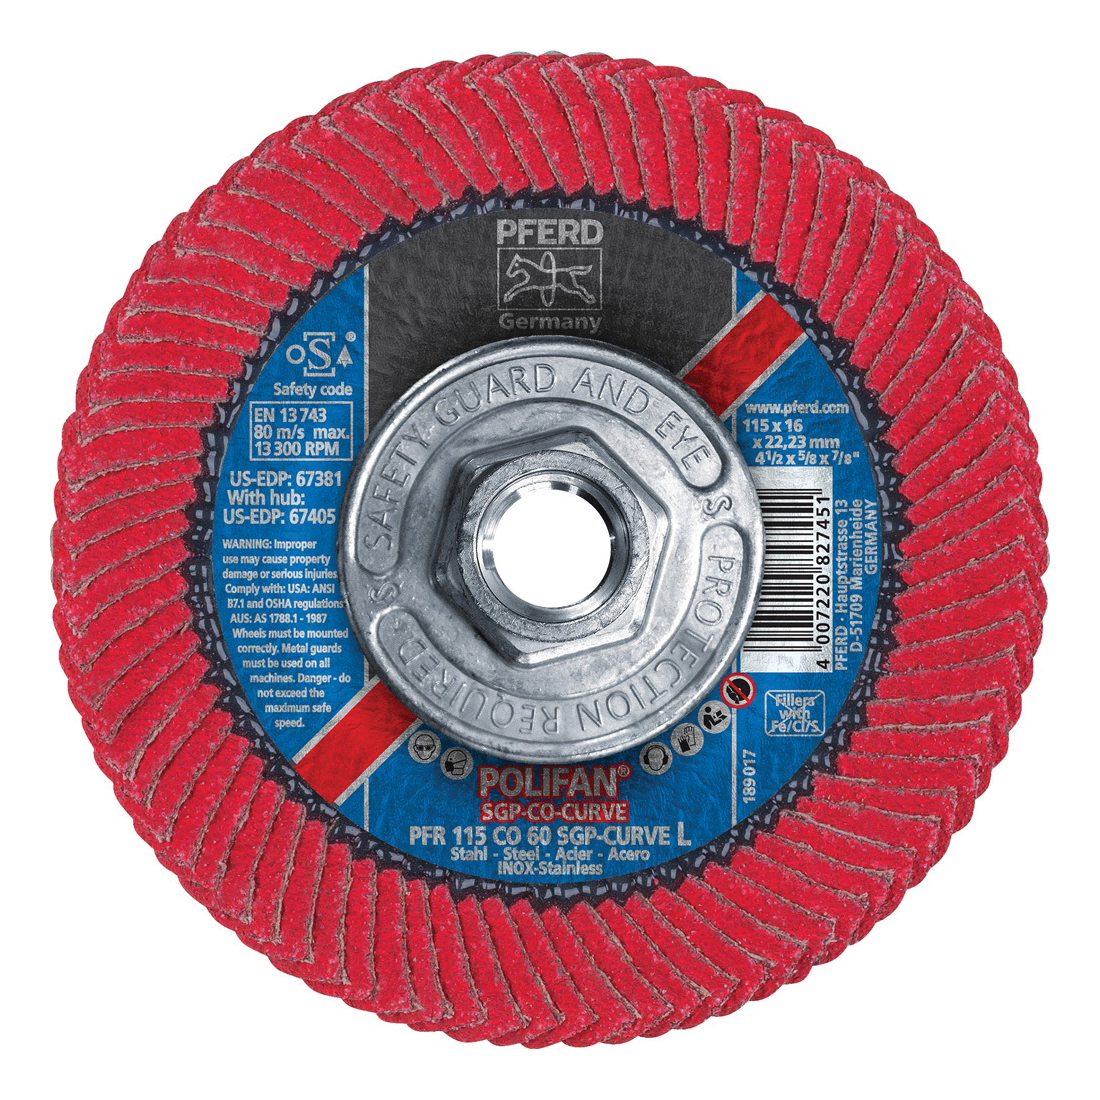 PFERD Polifan® 67405 Special Line SGP CO-CURVE Threaded Coated Abrasive Flap Disc, 4-1/2 in Dia, 60 Grit, Ceramic Oxide Abrasive, Type PFR/Radial Disc